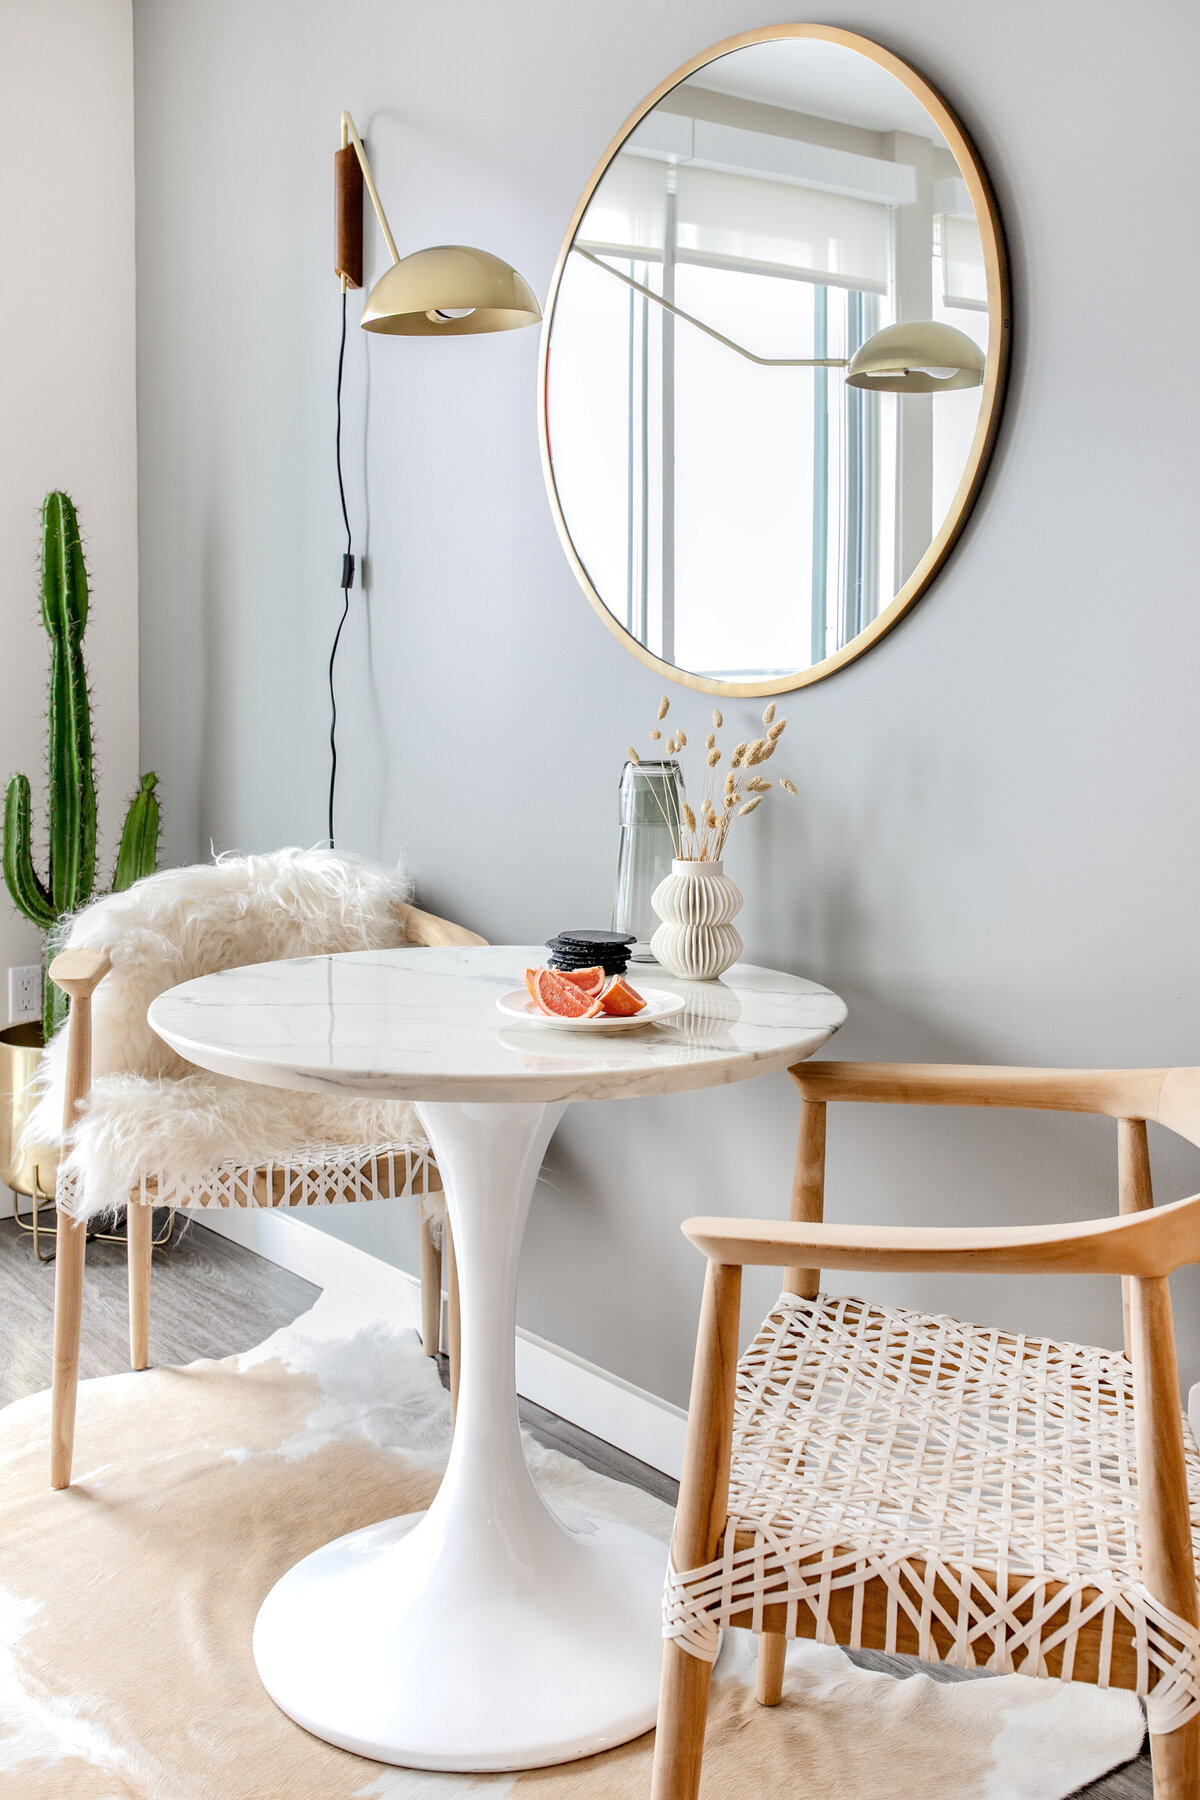 White marble Saarinen tulip dining table alongside wooden dining chairs with white leather woven seats. Round brass mirror and  brass sconce light hanging above